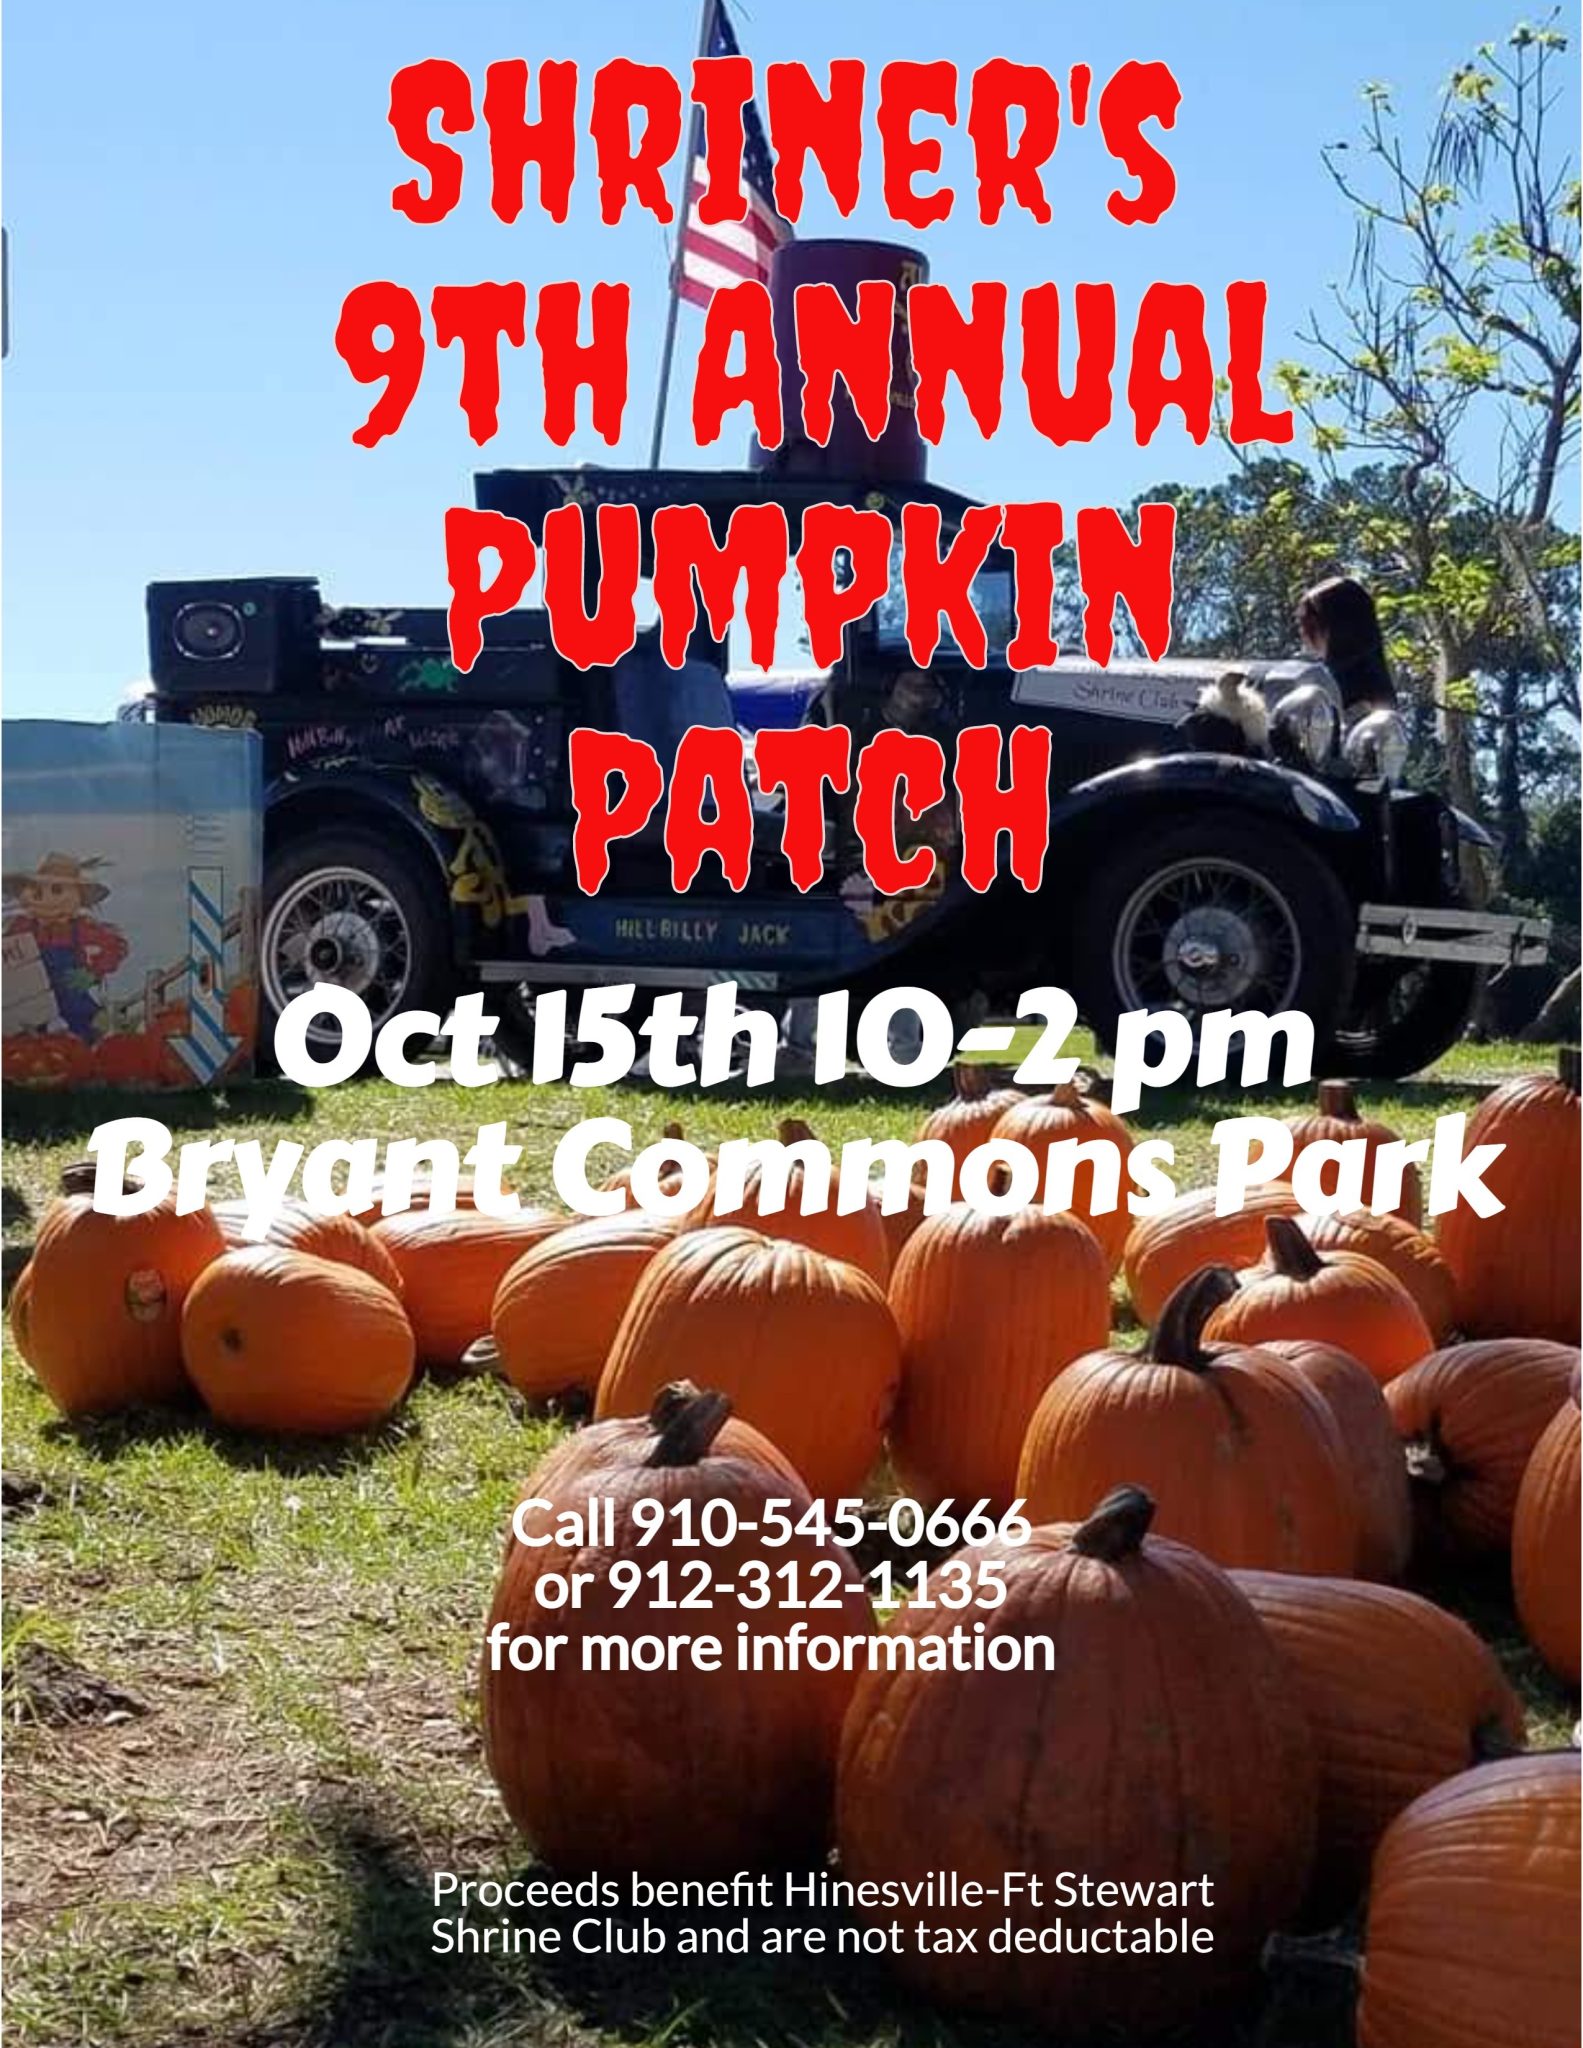 Flyer for Shriner's 9th Annual Pumpkin Patch